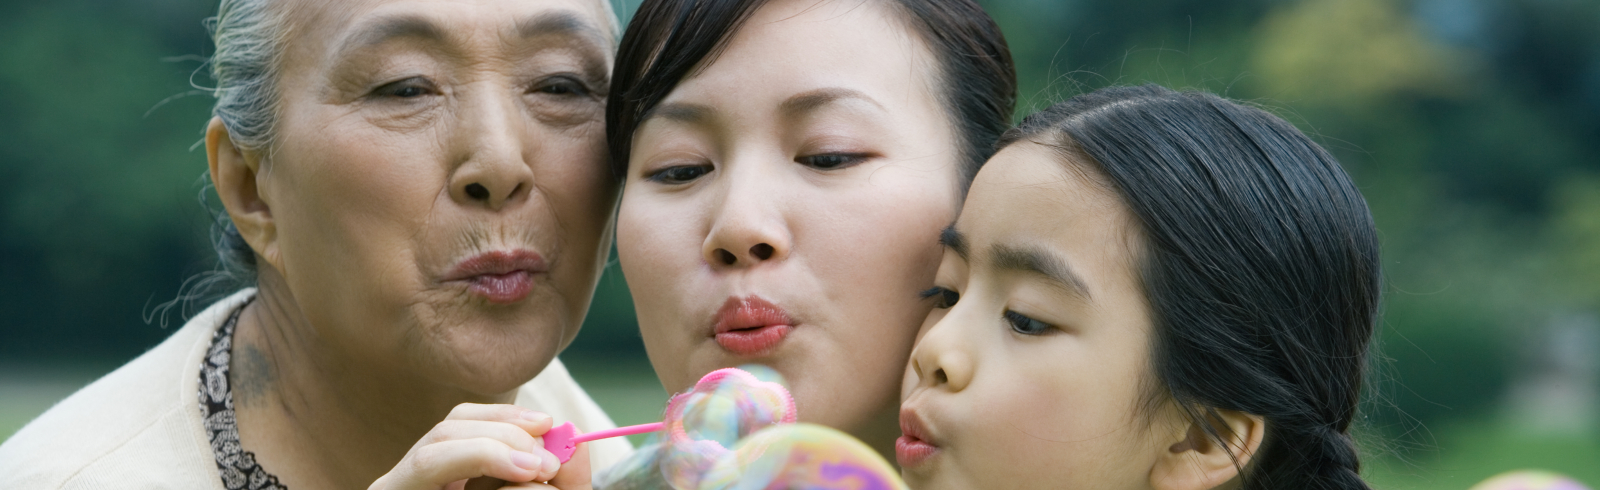 Three generations - grandmother, mother and granddaughter - blowing bubbles together